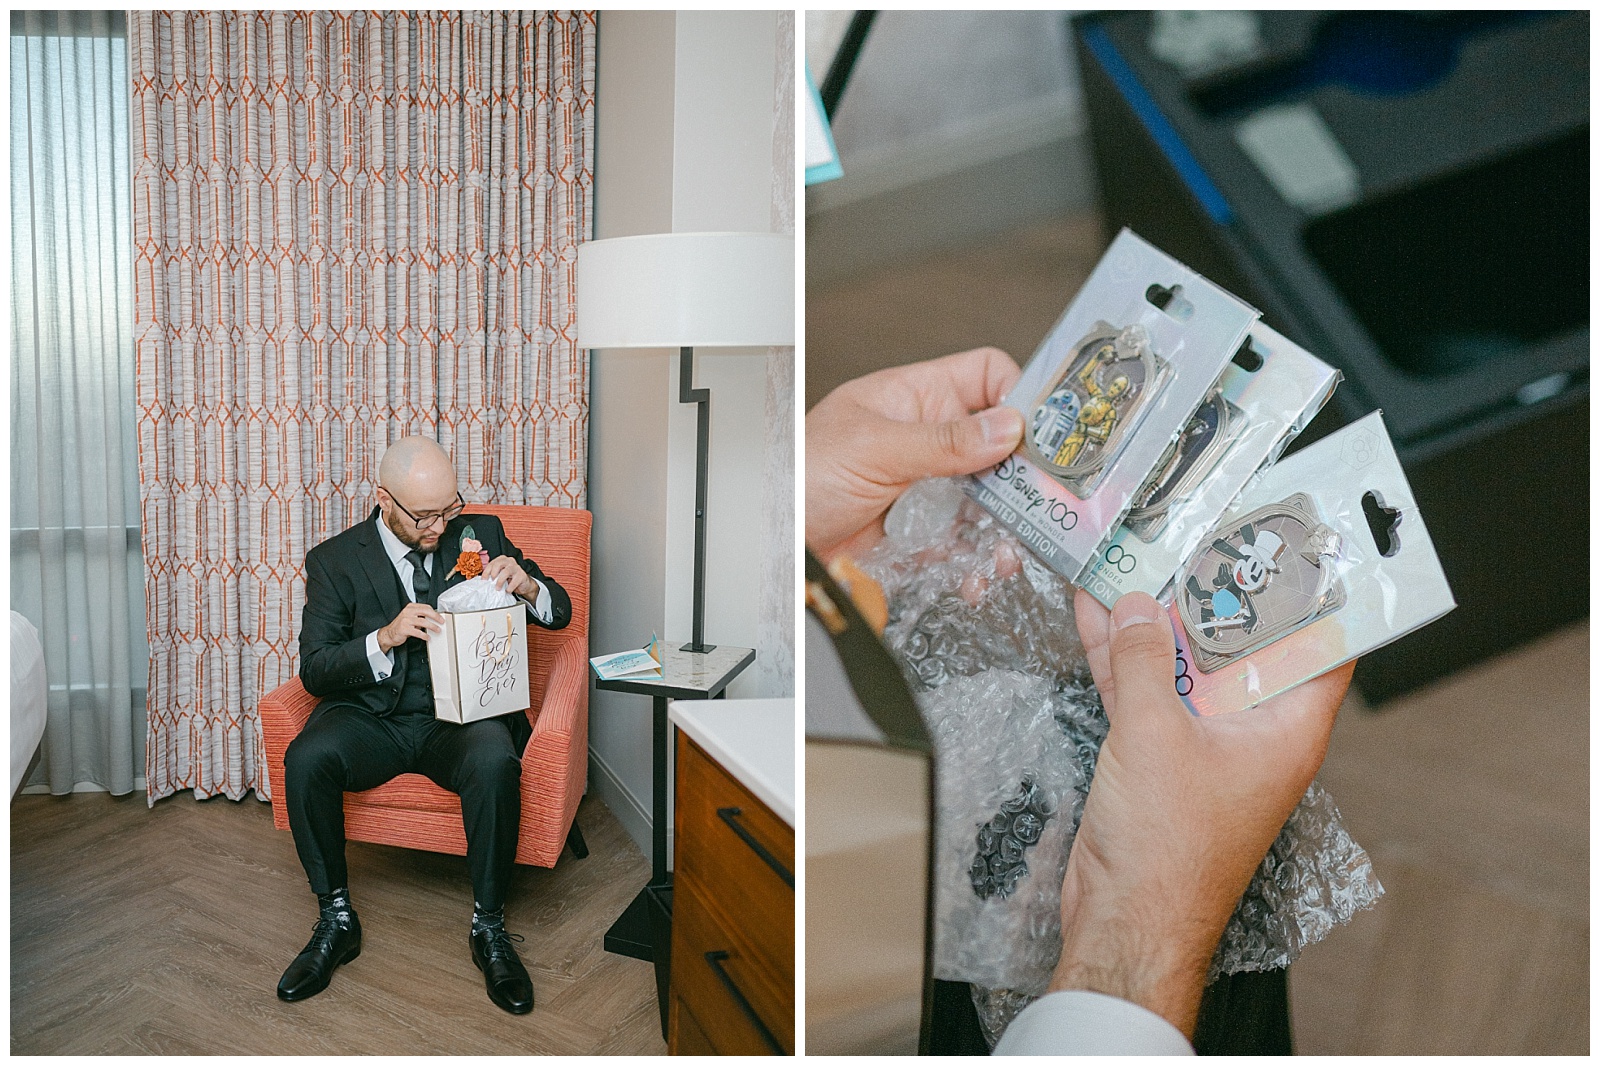 Groom opening his wedding gift from his bride before the first look. Gift received Disney pins. By Elizabeth Kane Photography at Disney's Riviera Resort in Orlando Florida